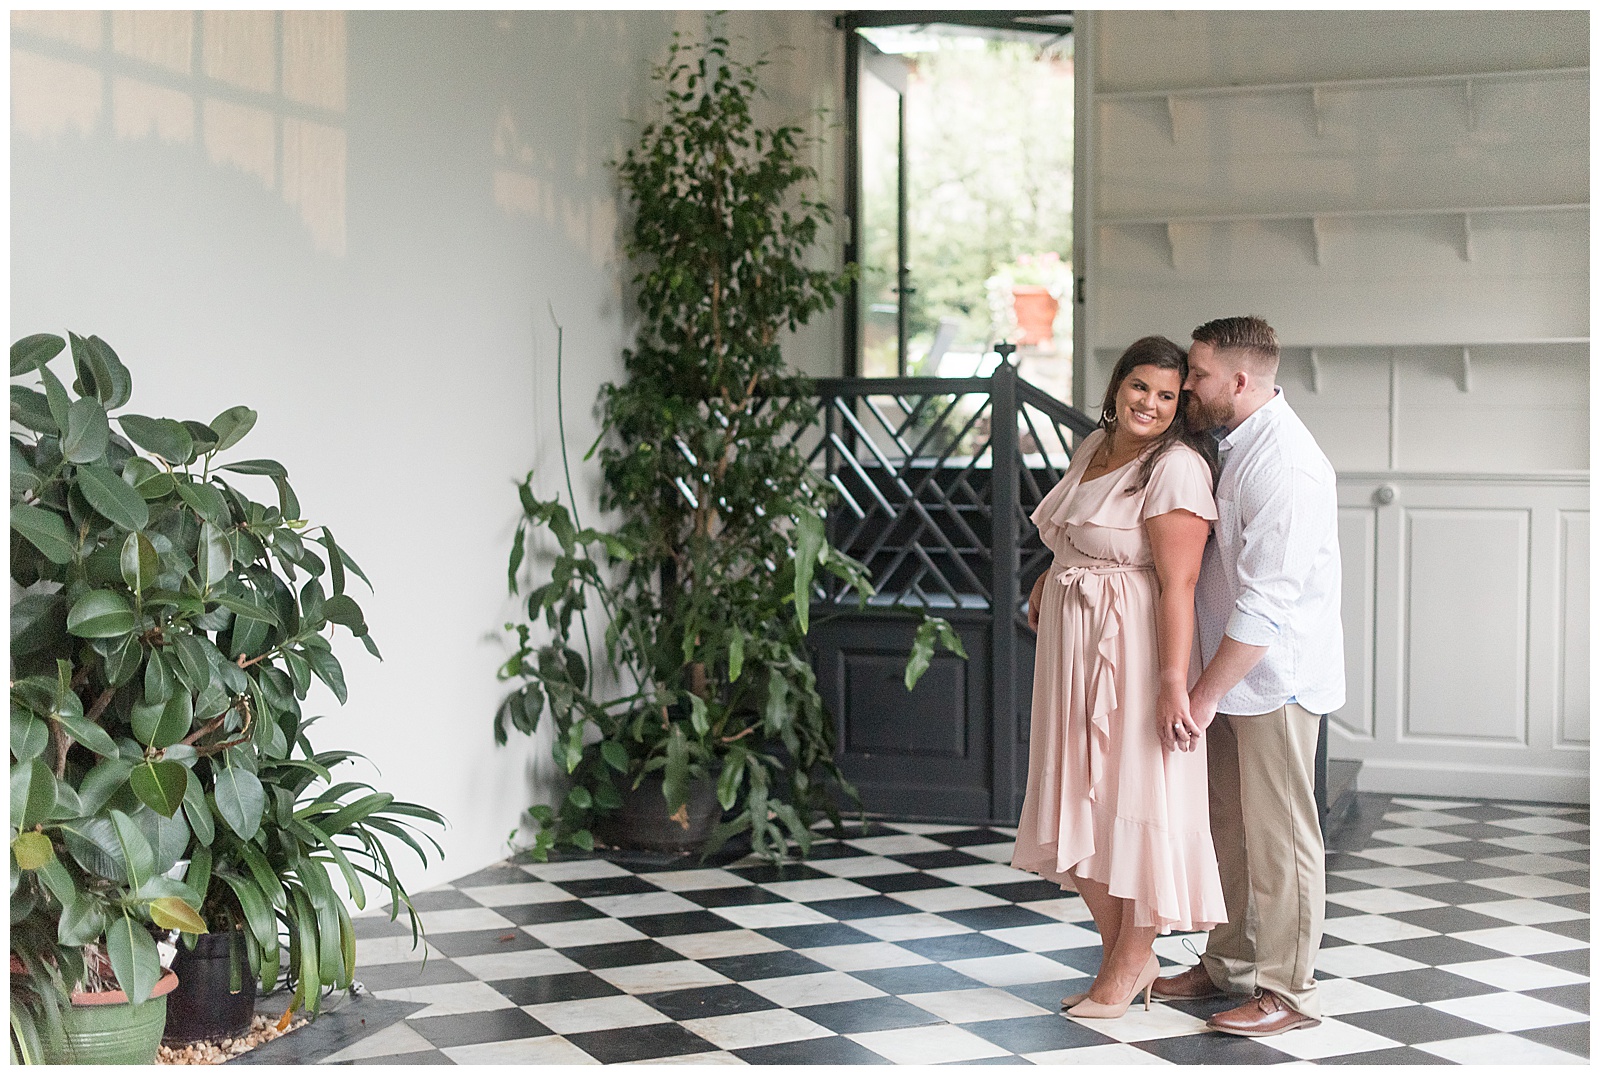 guy standing behind girl as she looks down smiling inside white room with checkered floors and houseplants in lancaster pennsylvania